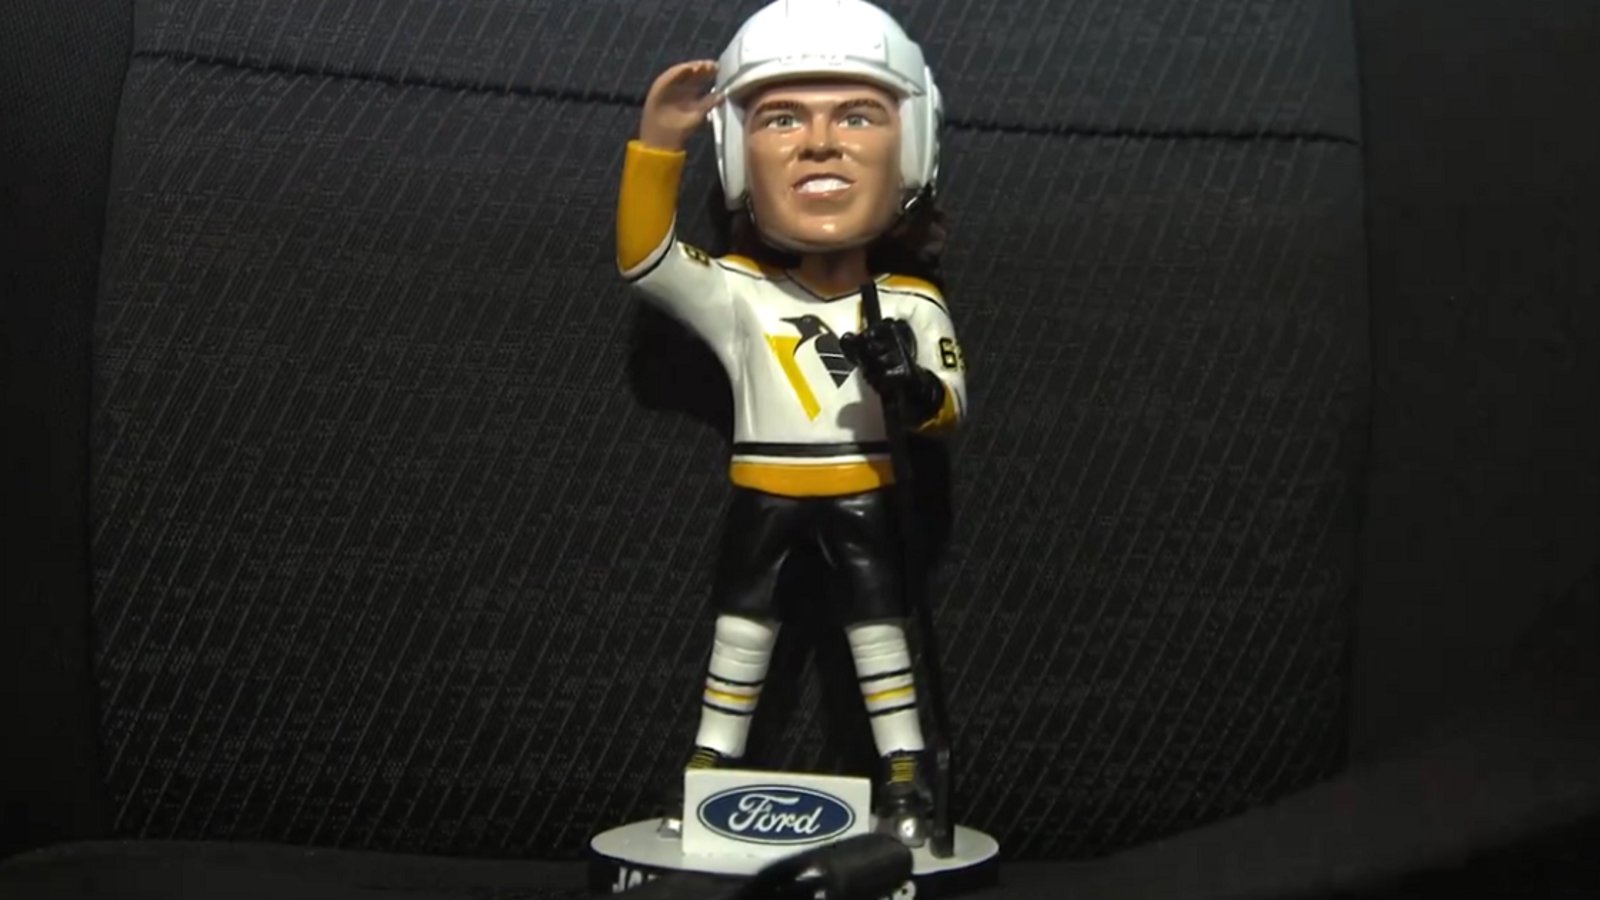 A new clue in the Jaromir Jagr bobbleheads mystery.